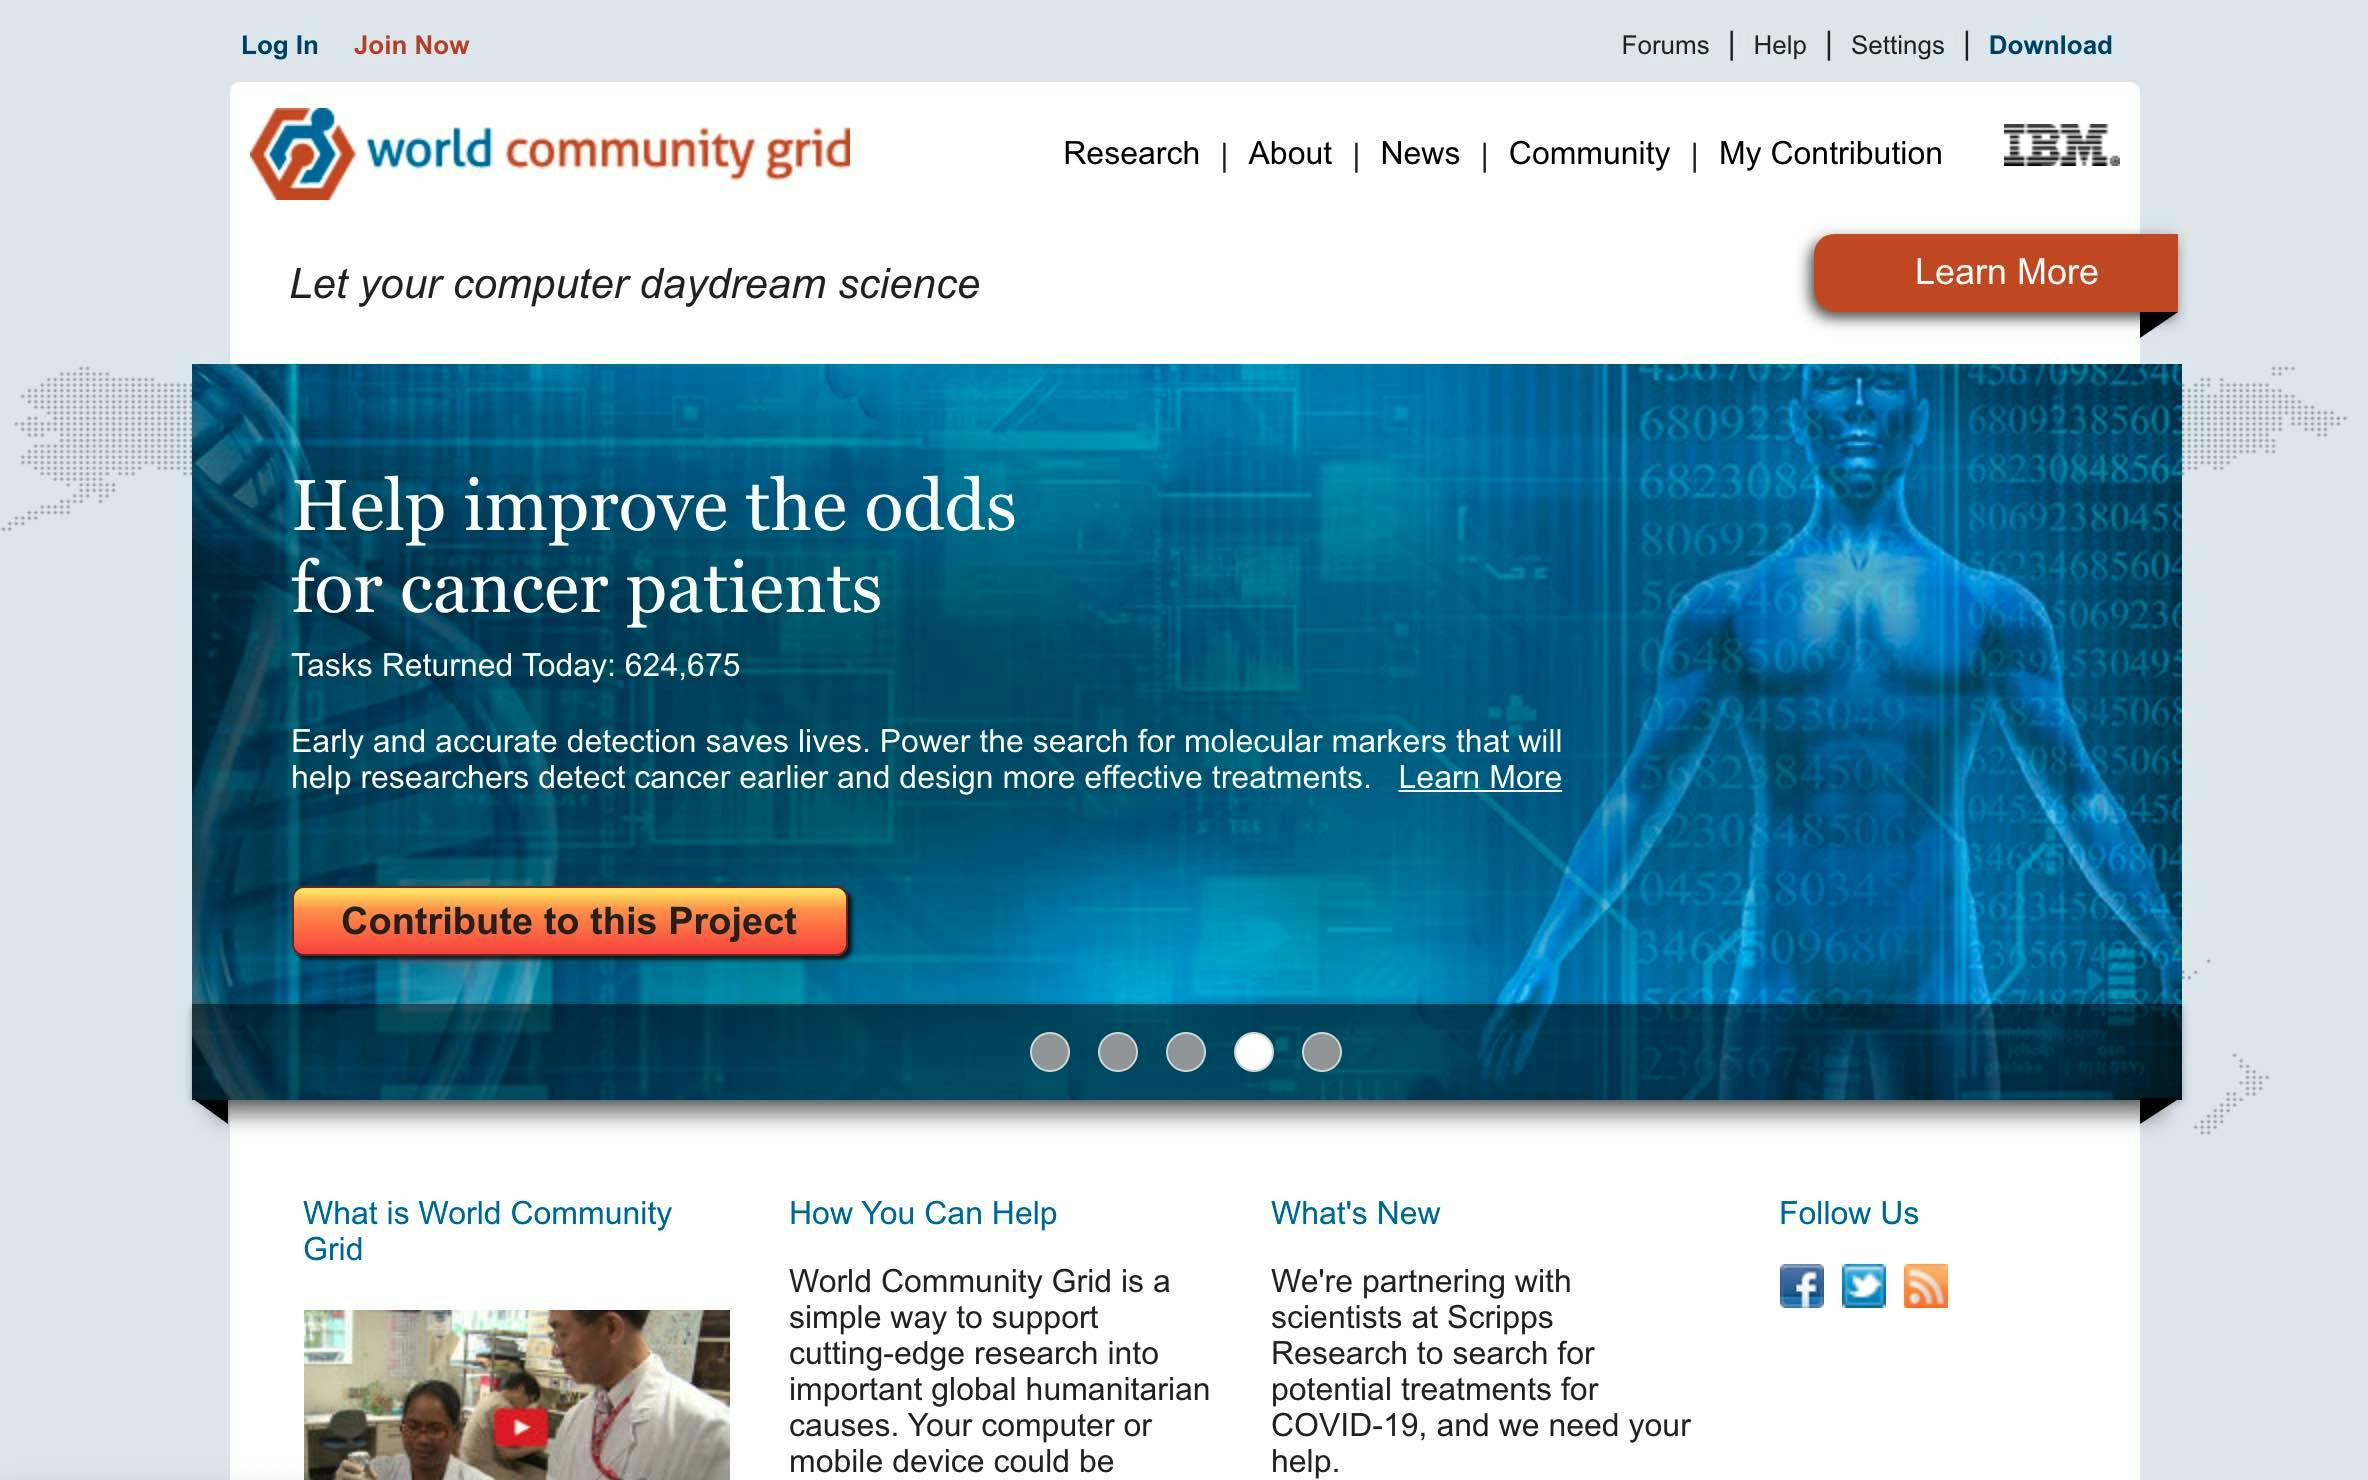 Screenshot of World Community Grid's website before the redesign